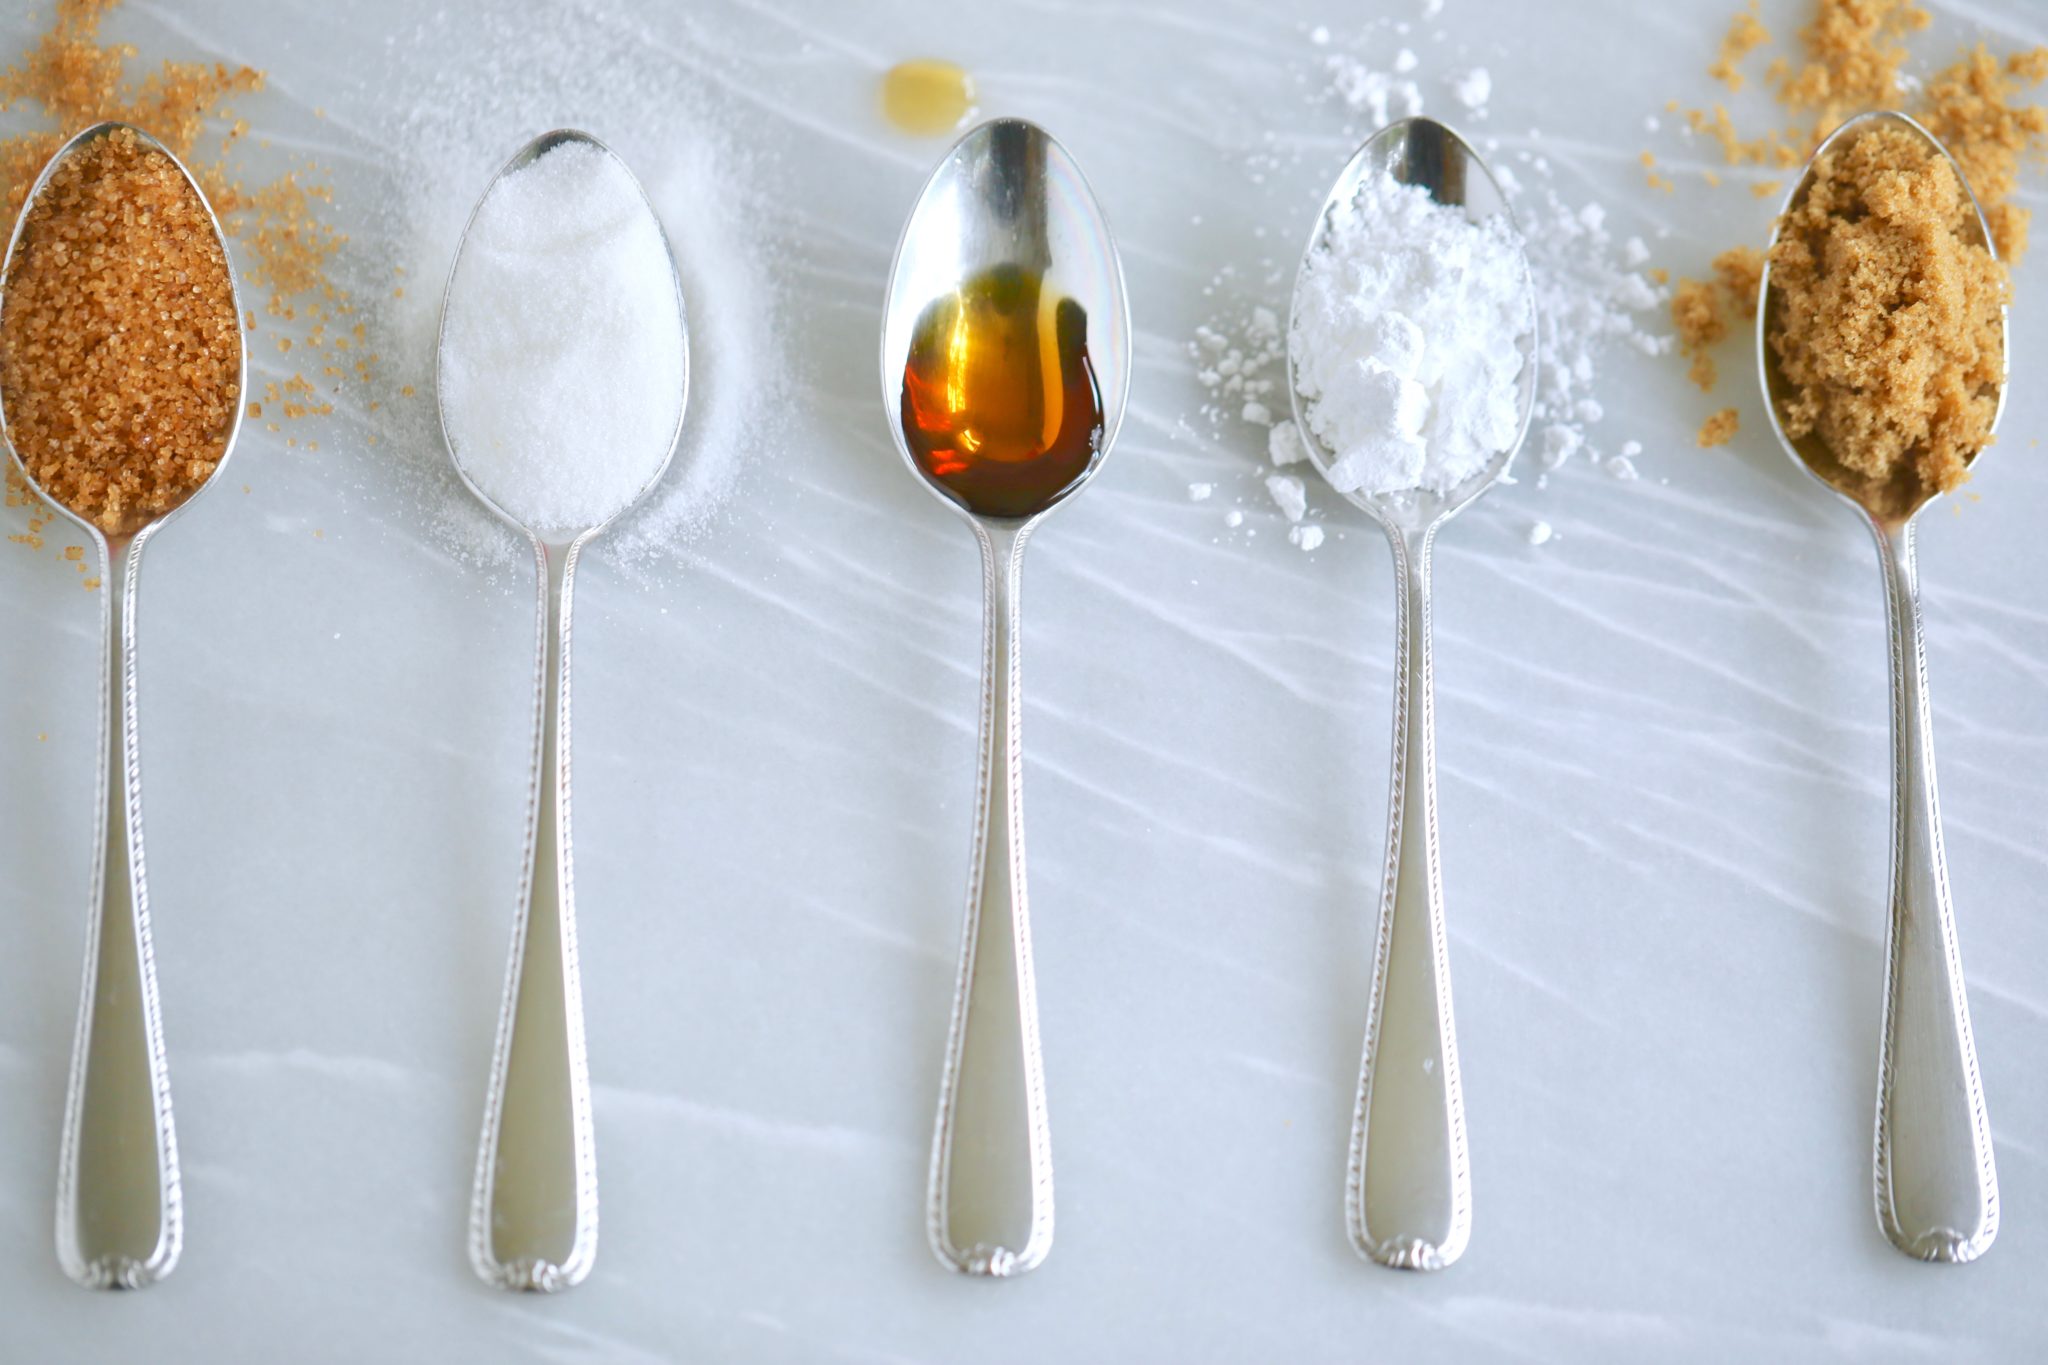 5 spoons with different sugar substitutes.